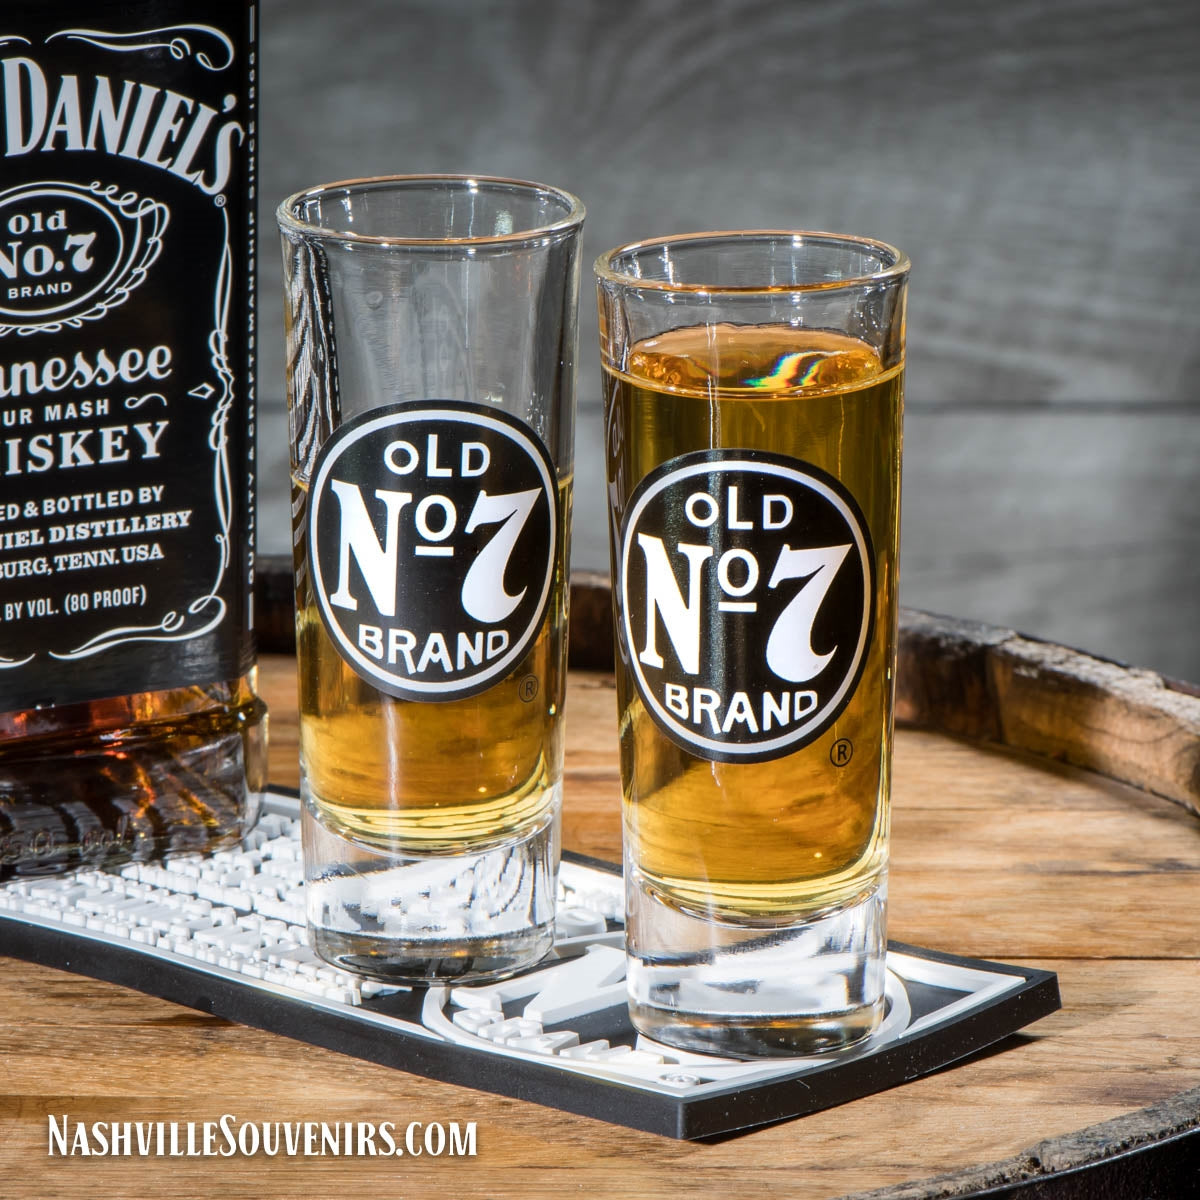 This officially licensed Jack Daniel's Old No.7 shooter set will add a nice touch to your home bar. This JD shooter set is one you'll want to add to your Jack Daniel's barware collection. The shooter glasses are the perfect resting place for 2 ounces of Tennessee Whiskey.